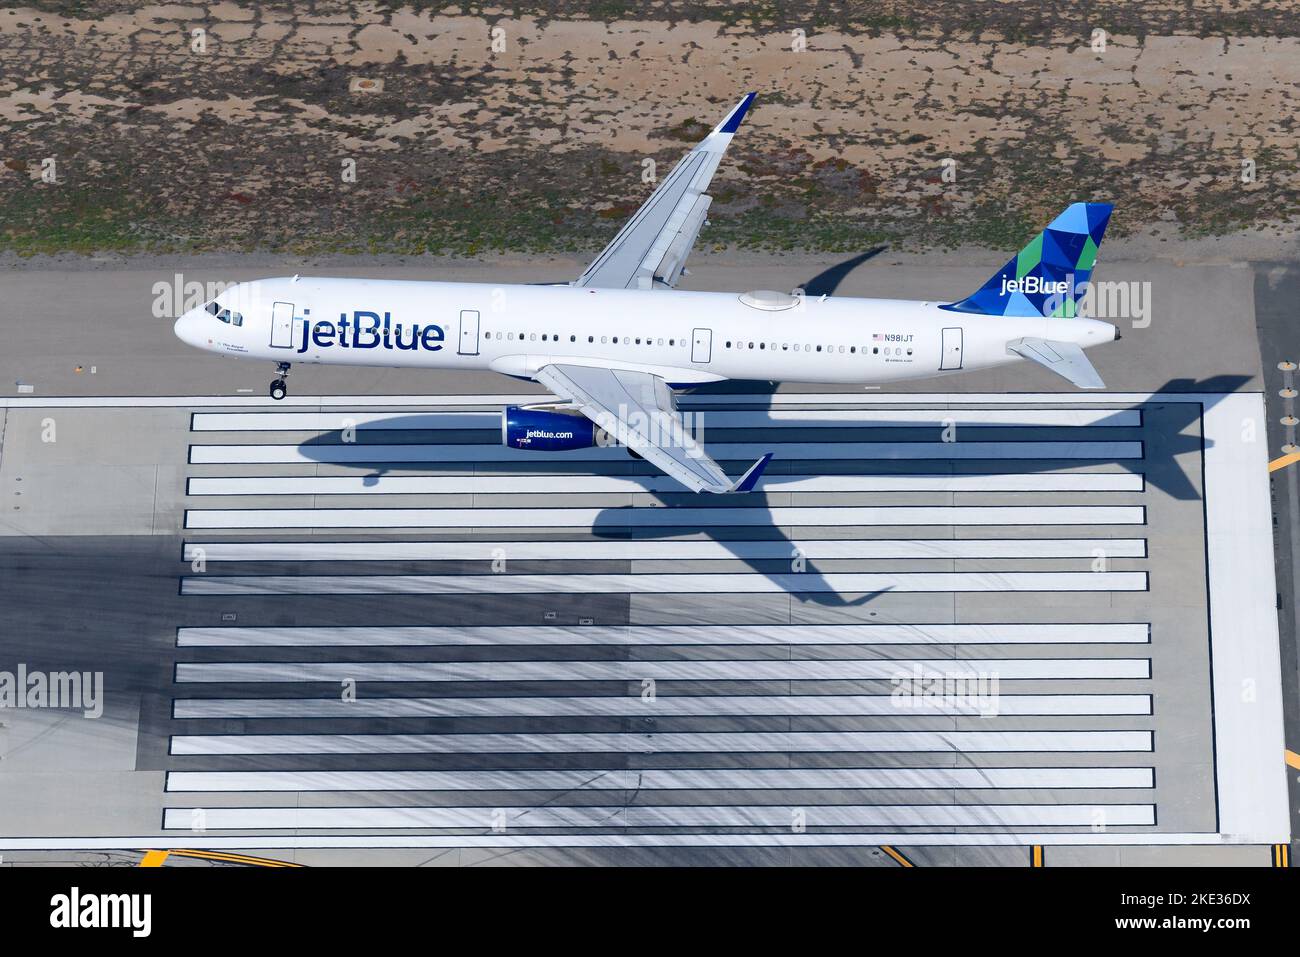 JetBlue Airbus A321 aircraft landing on airport runway. Airplane A321 of Jet Blue airline registered as N981JT from above. Stock Photo